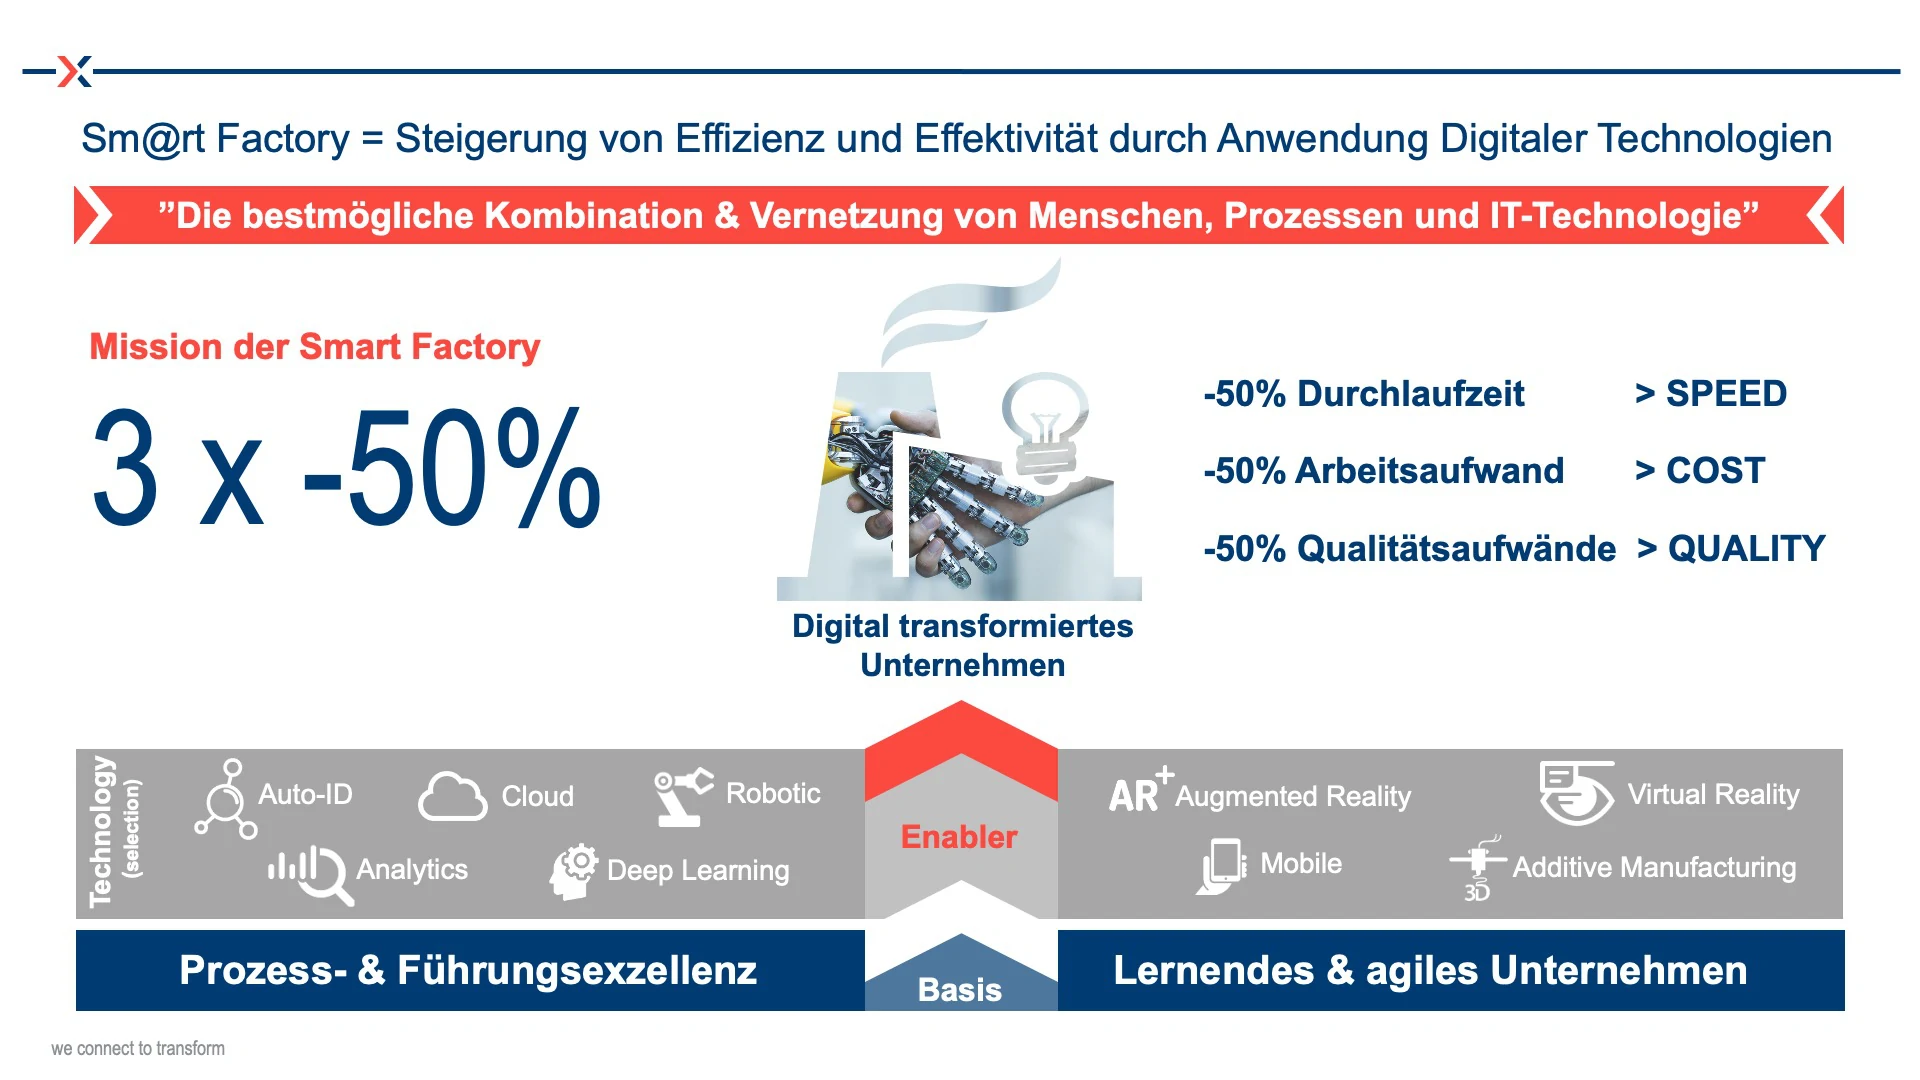 Mission of a Digital Transformation towards a Smart Factory: 3 x -50%